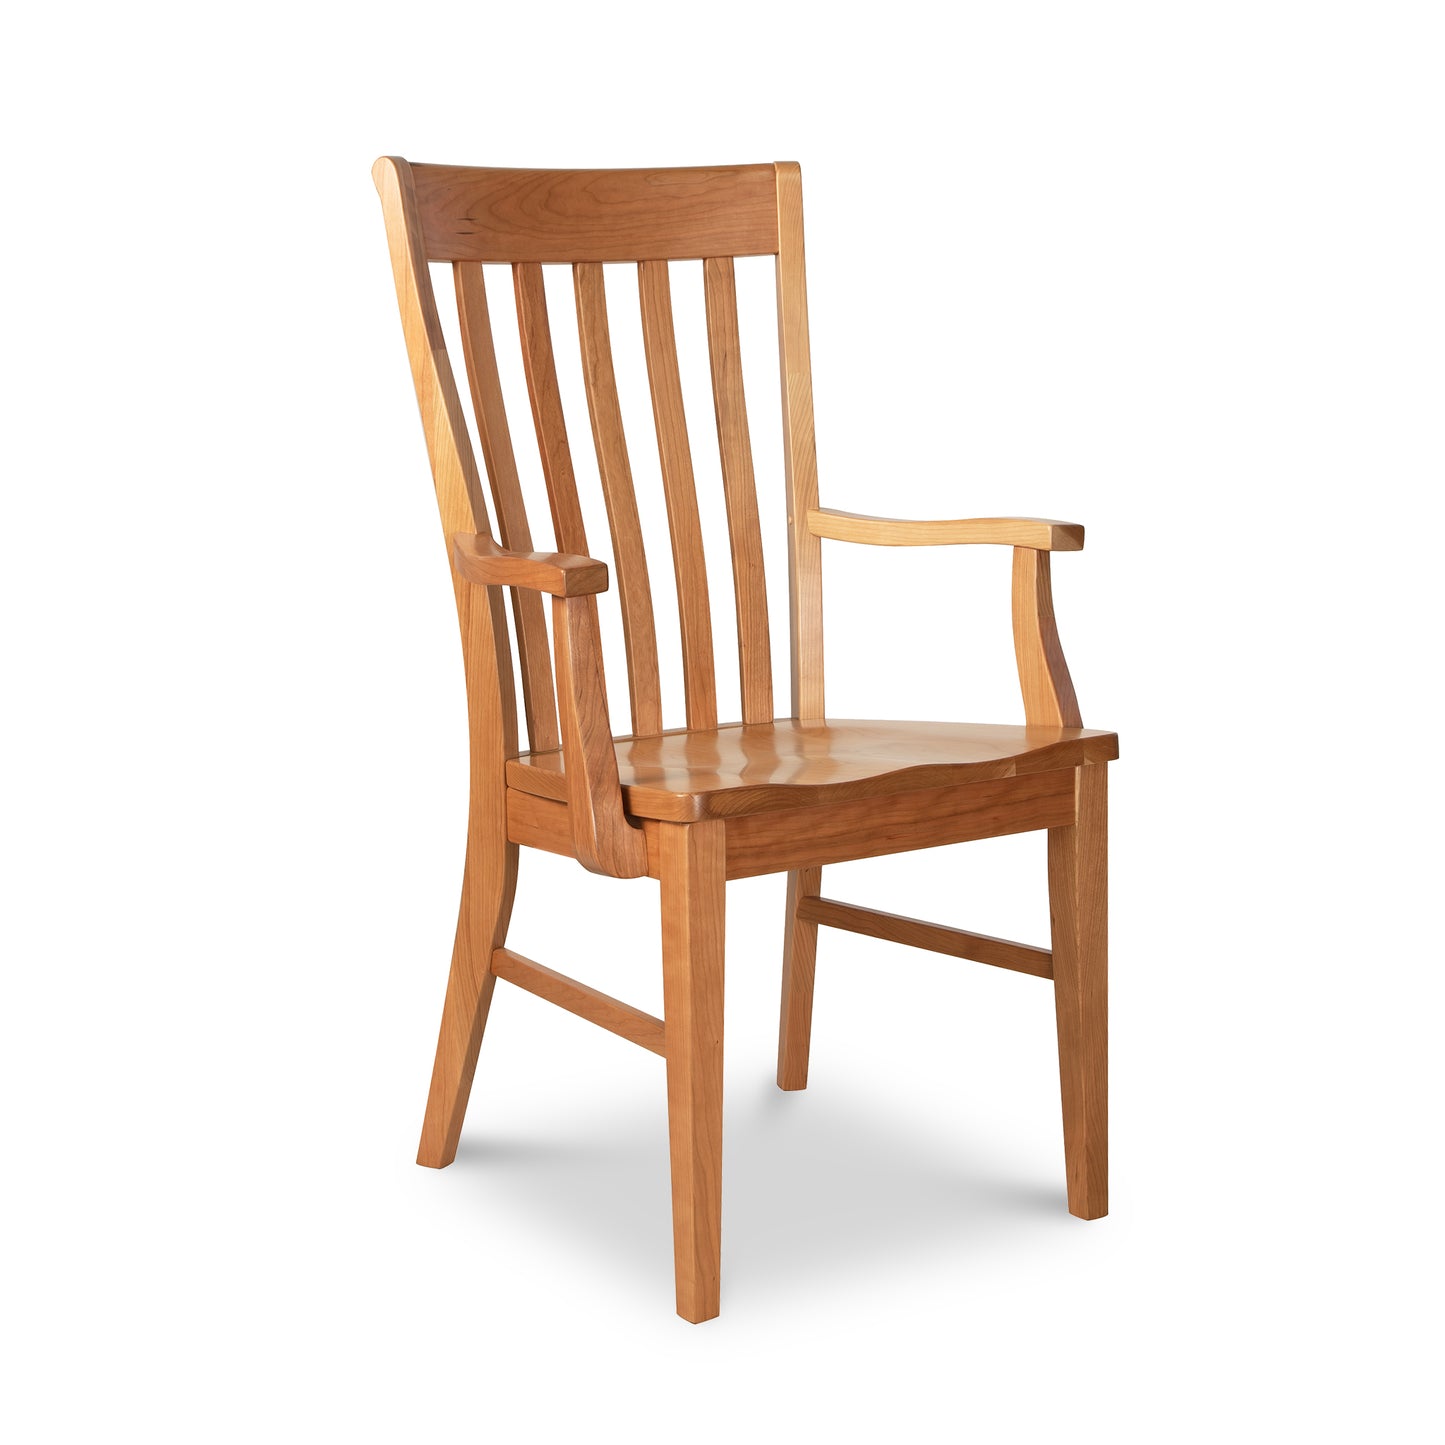 A wooden chair with a slatted back and arms.